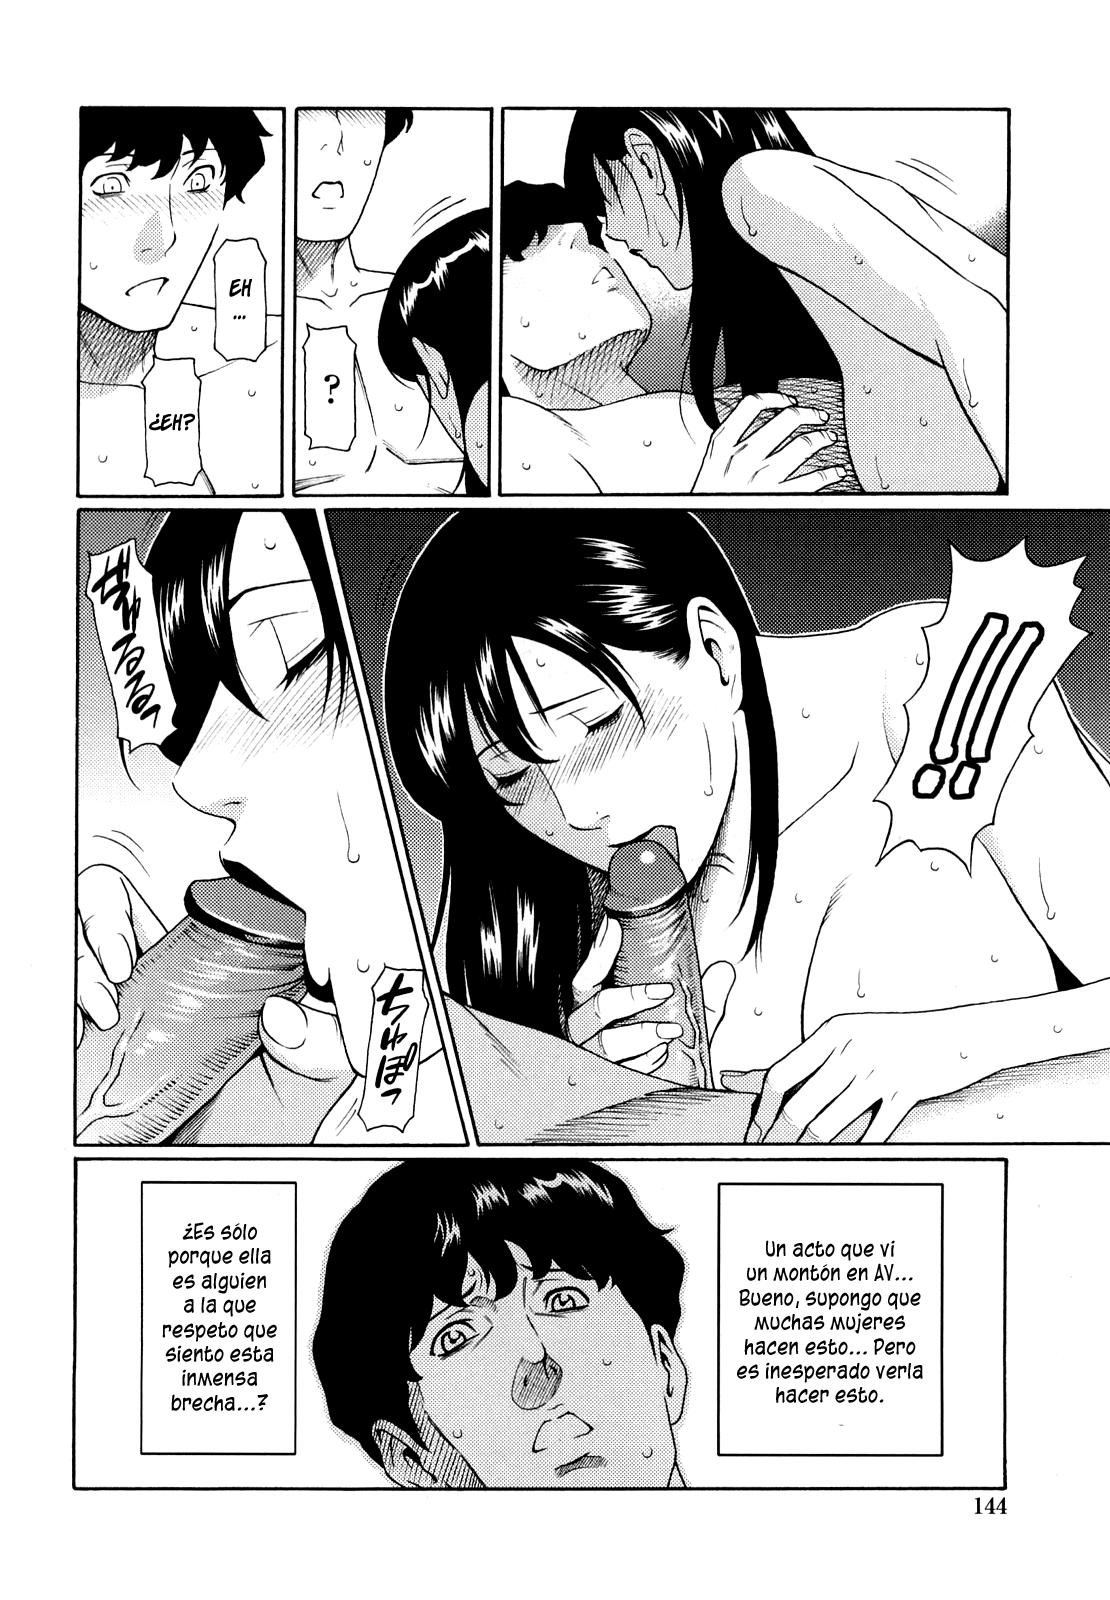 Immorality Love-Hole Completo (Sin Censura) Chapter-9 - 7